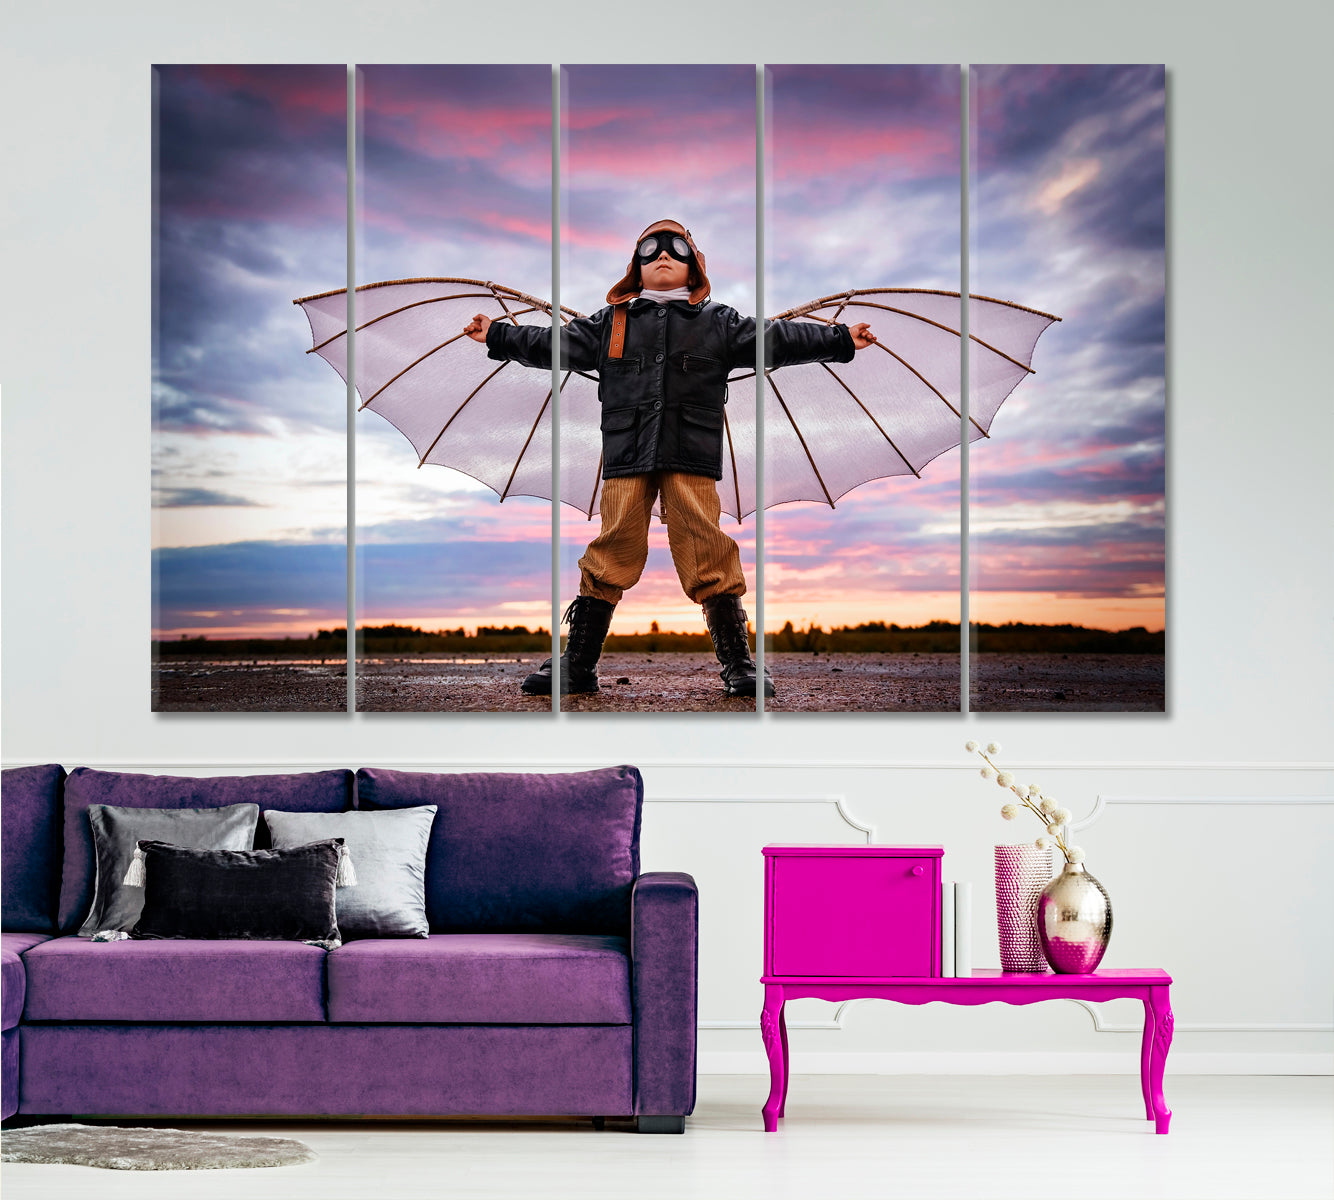 Pilot and Dreams of Flying Poster Photo Art Artesty 5 panels 36" x 24" 